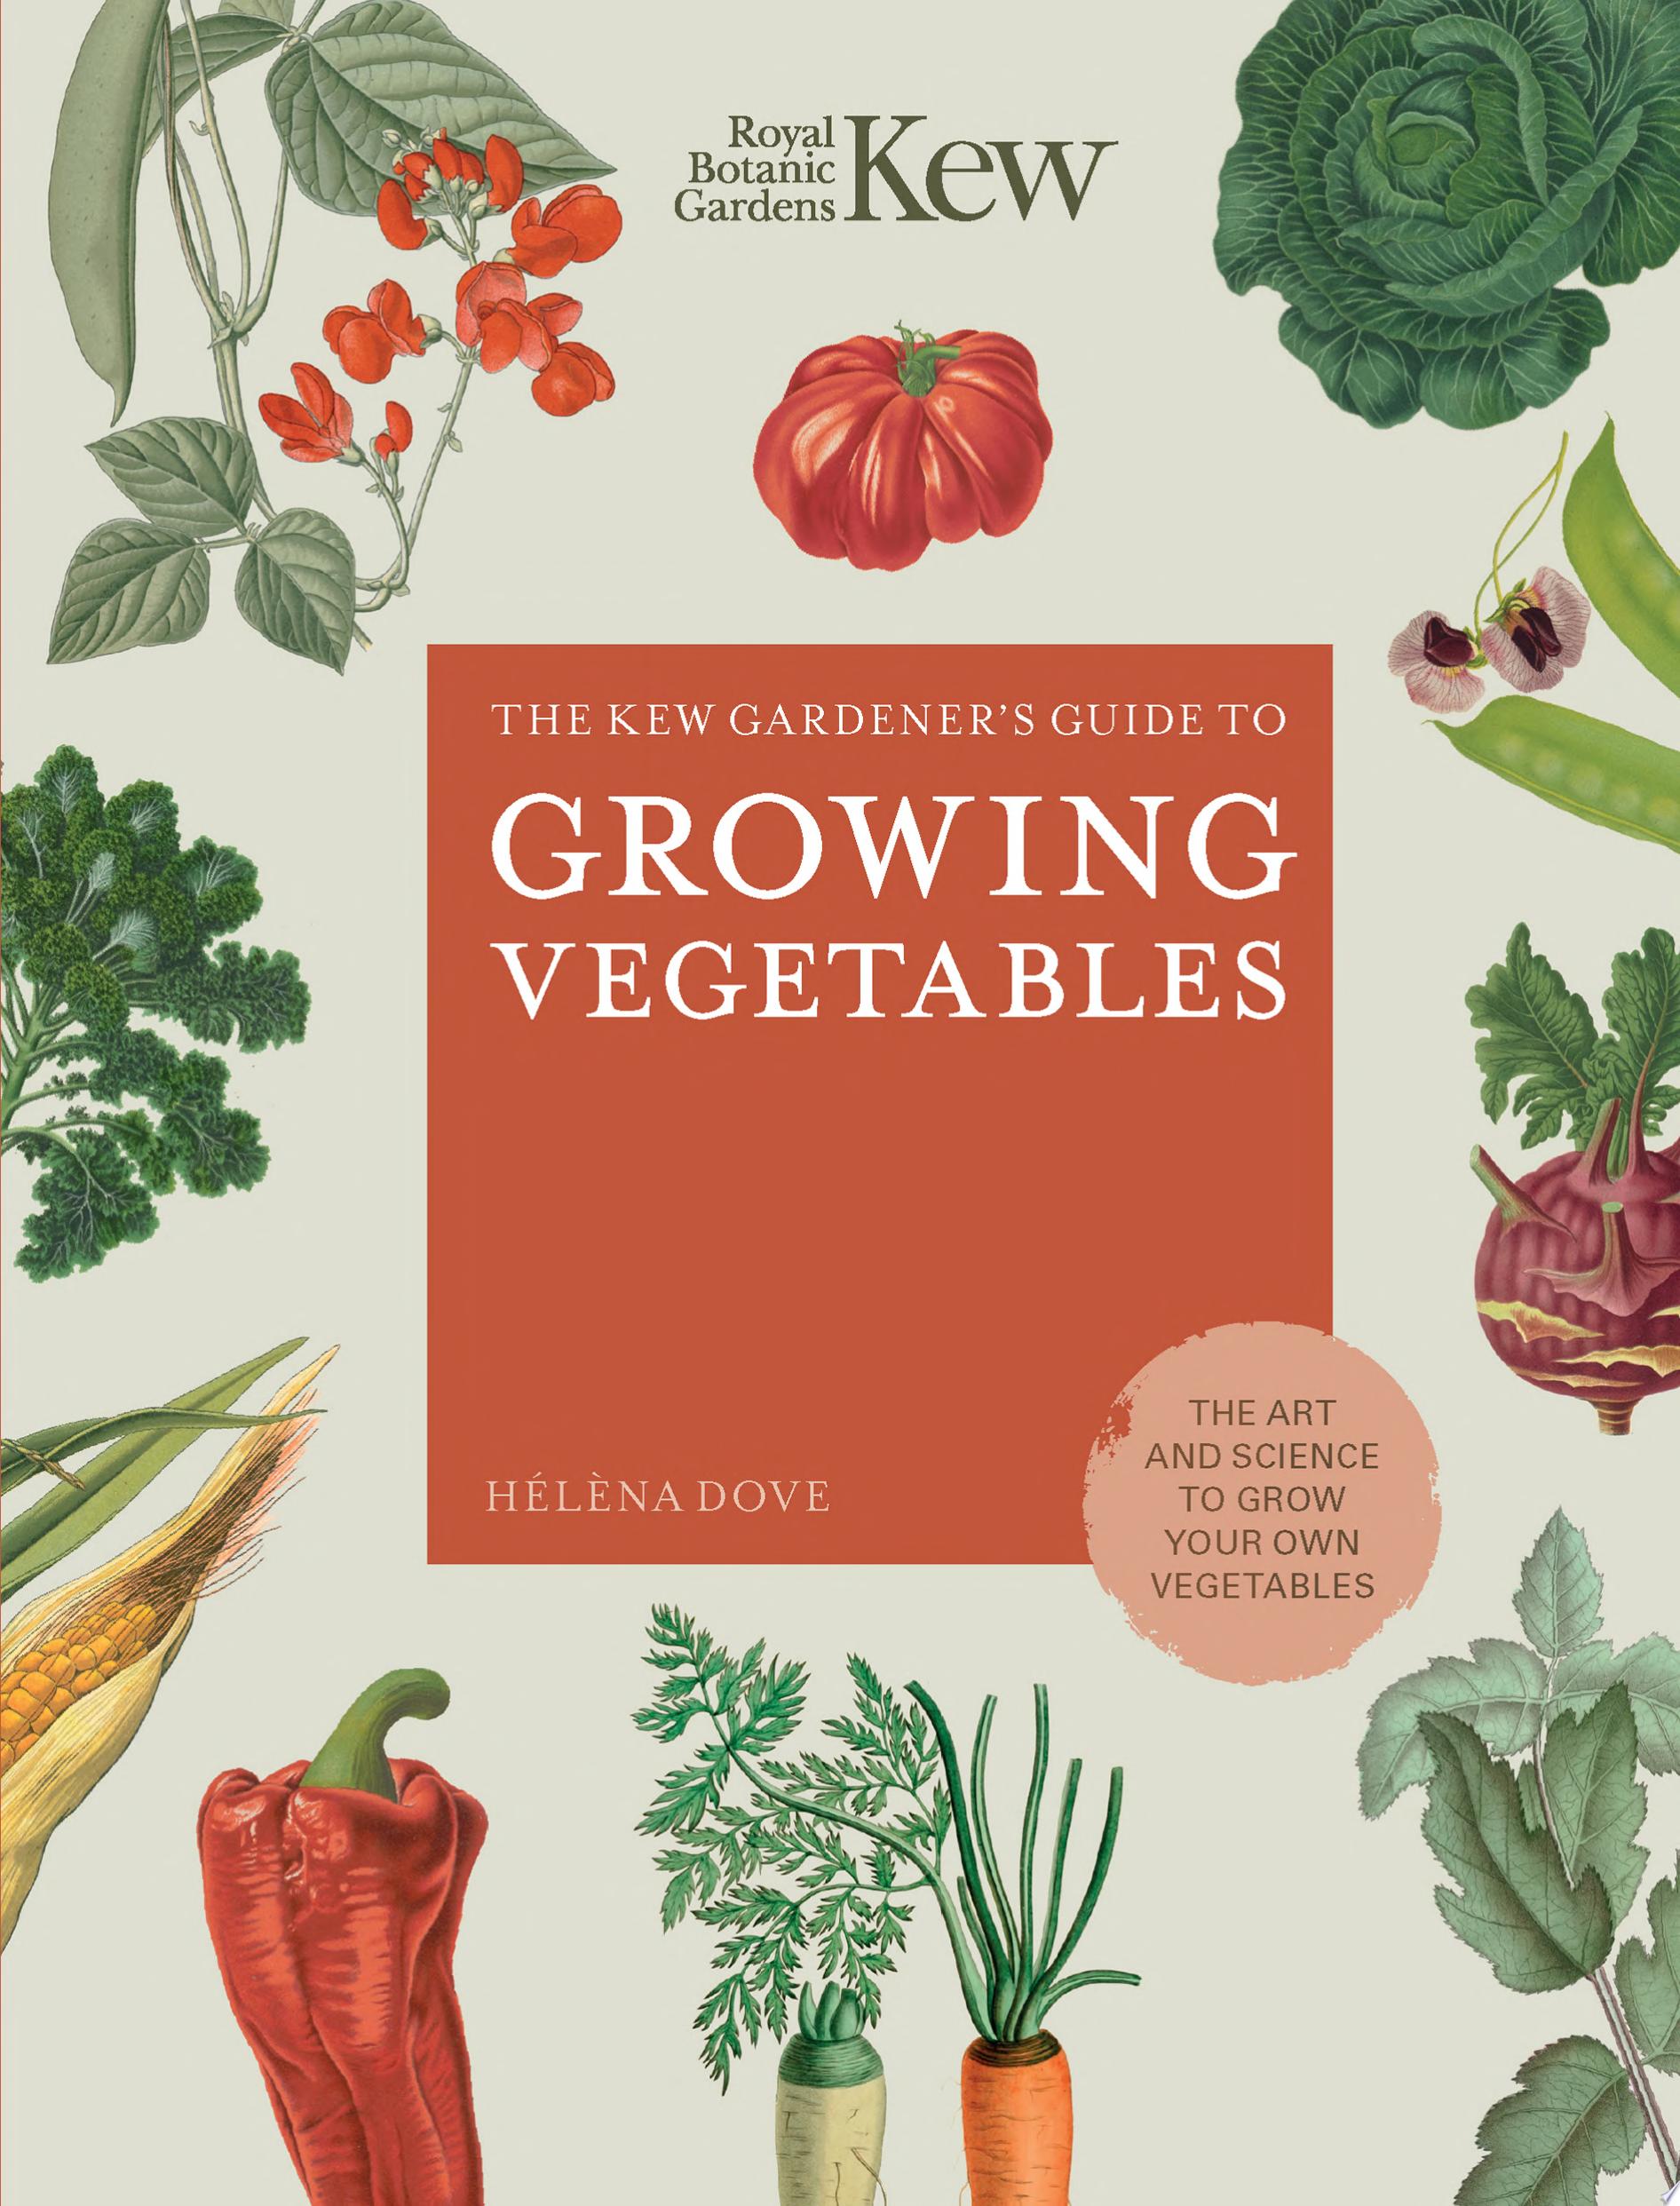 Image for "The Kew Gardener's Guide to Growing Vegetables"